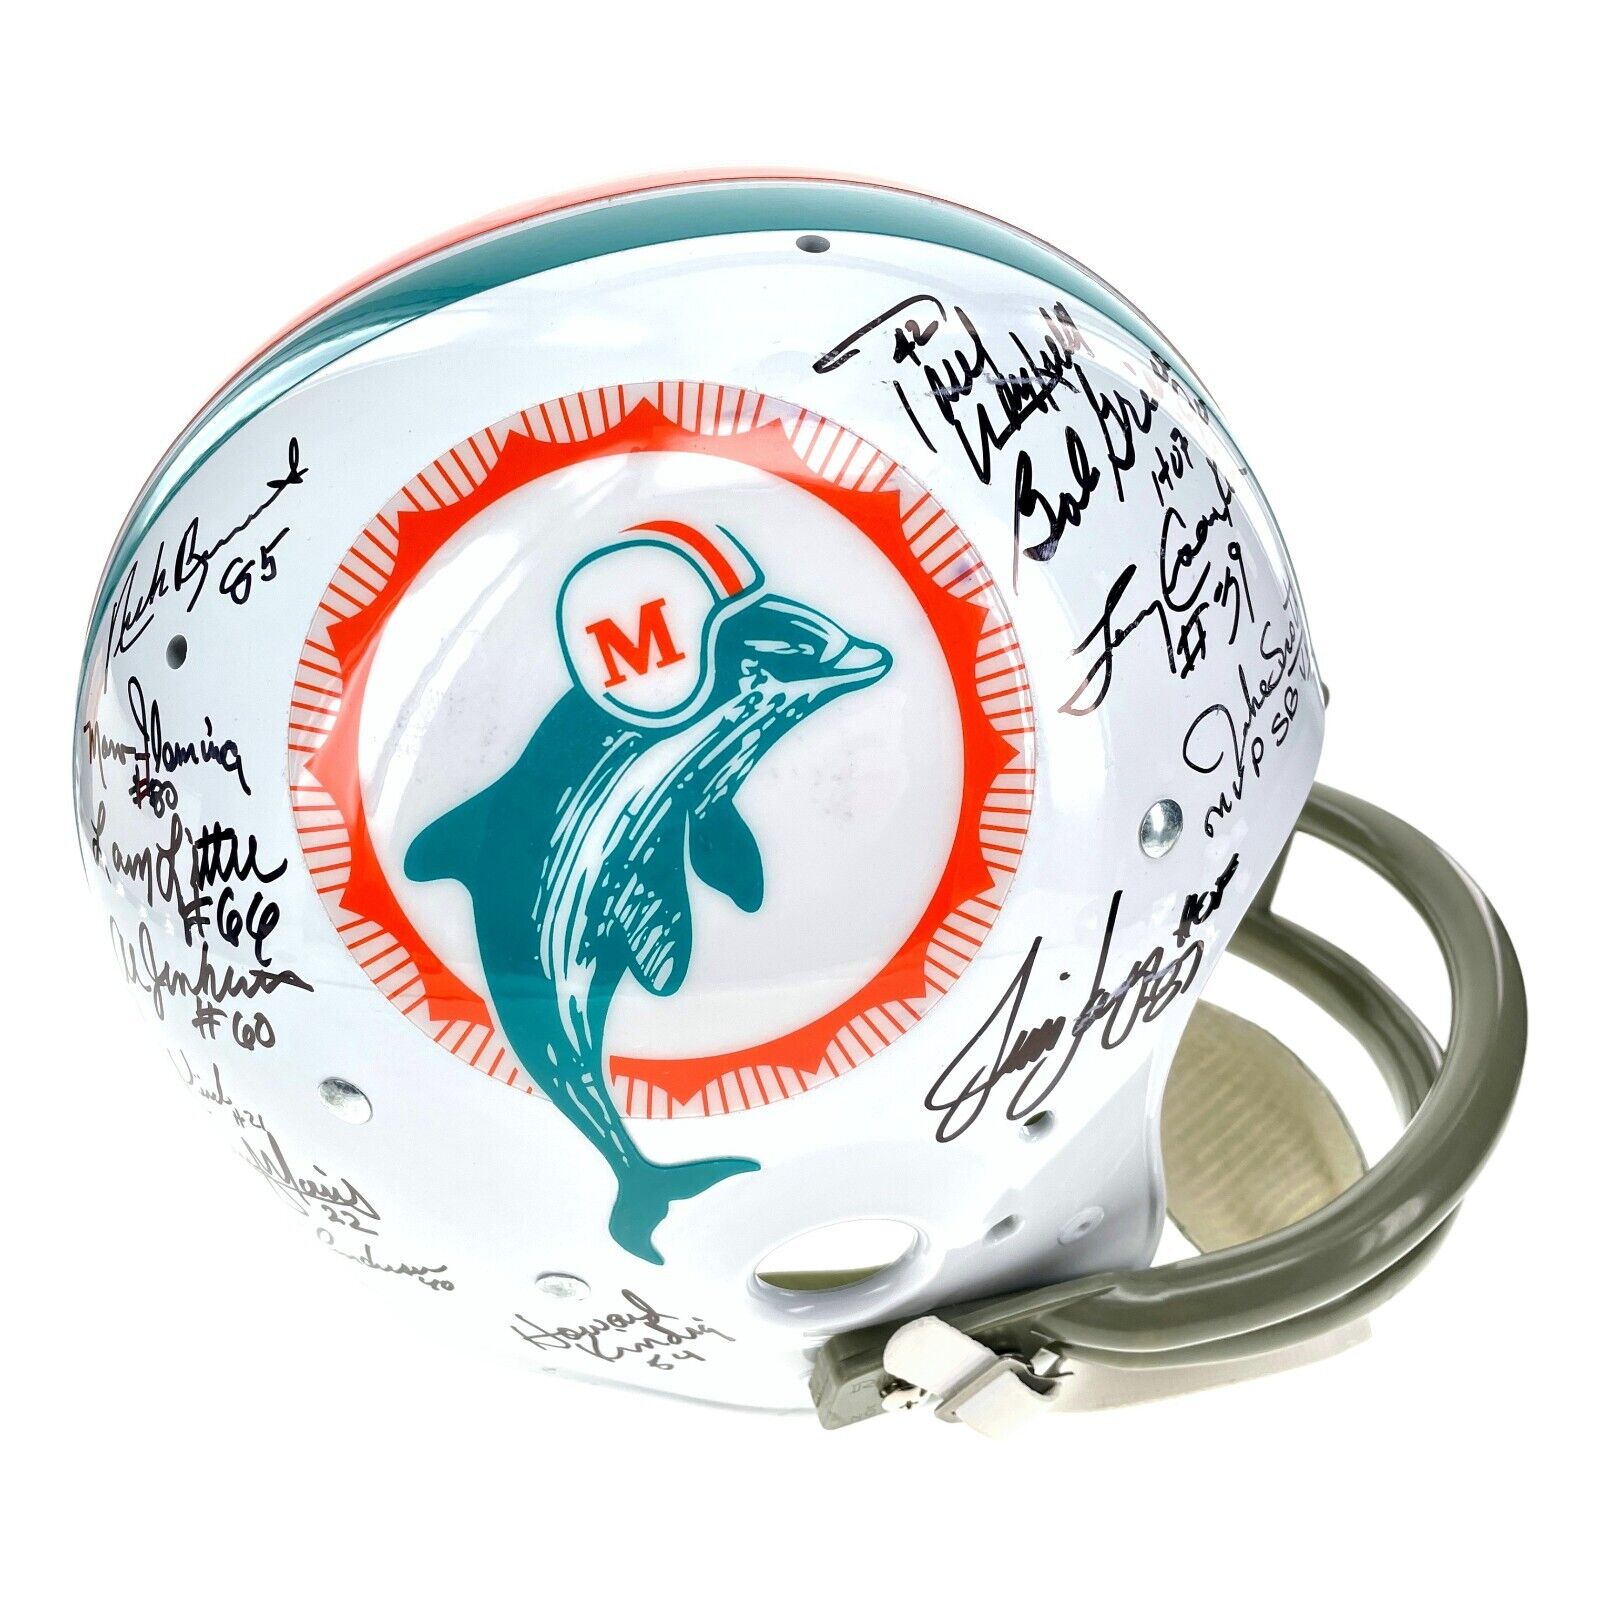 1972 Miami Dolphins Perfect Season Team Signed Helmet. The perfect